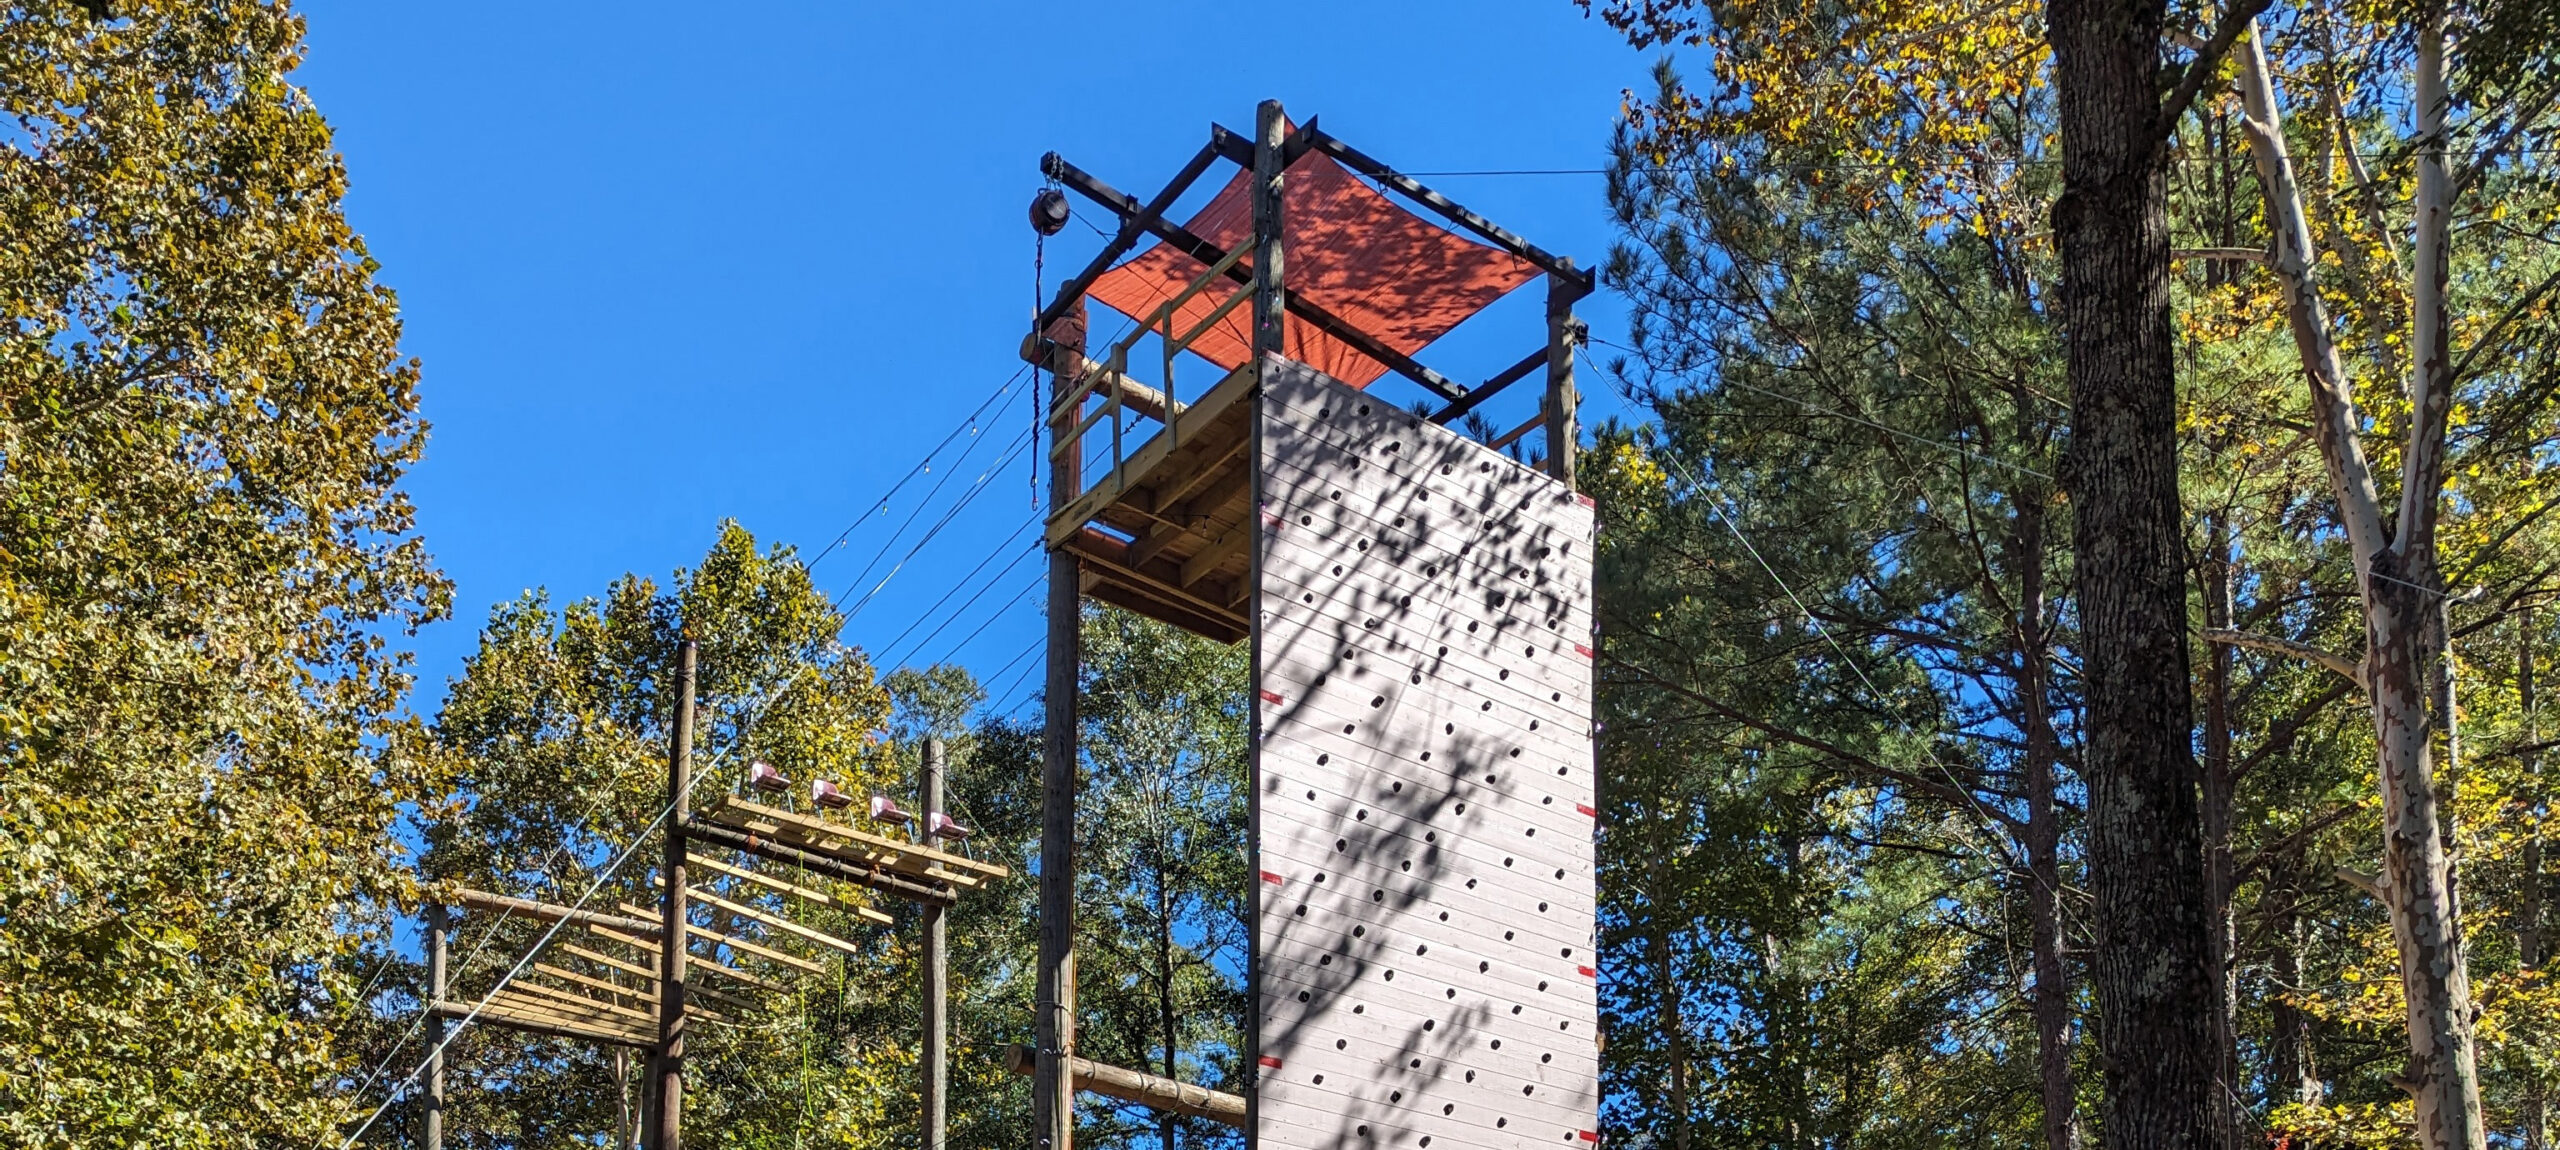 The Tower And High Team Challenge Course At Butter And Egg Adventures